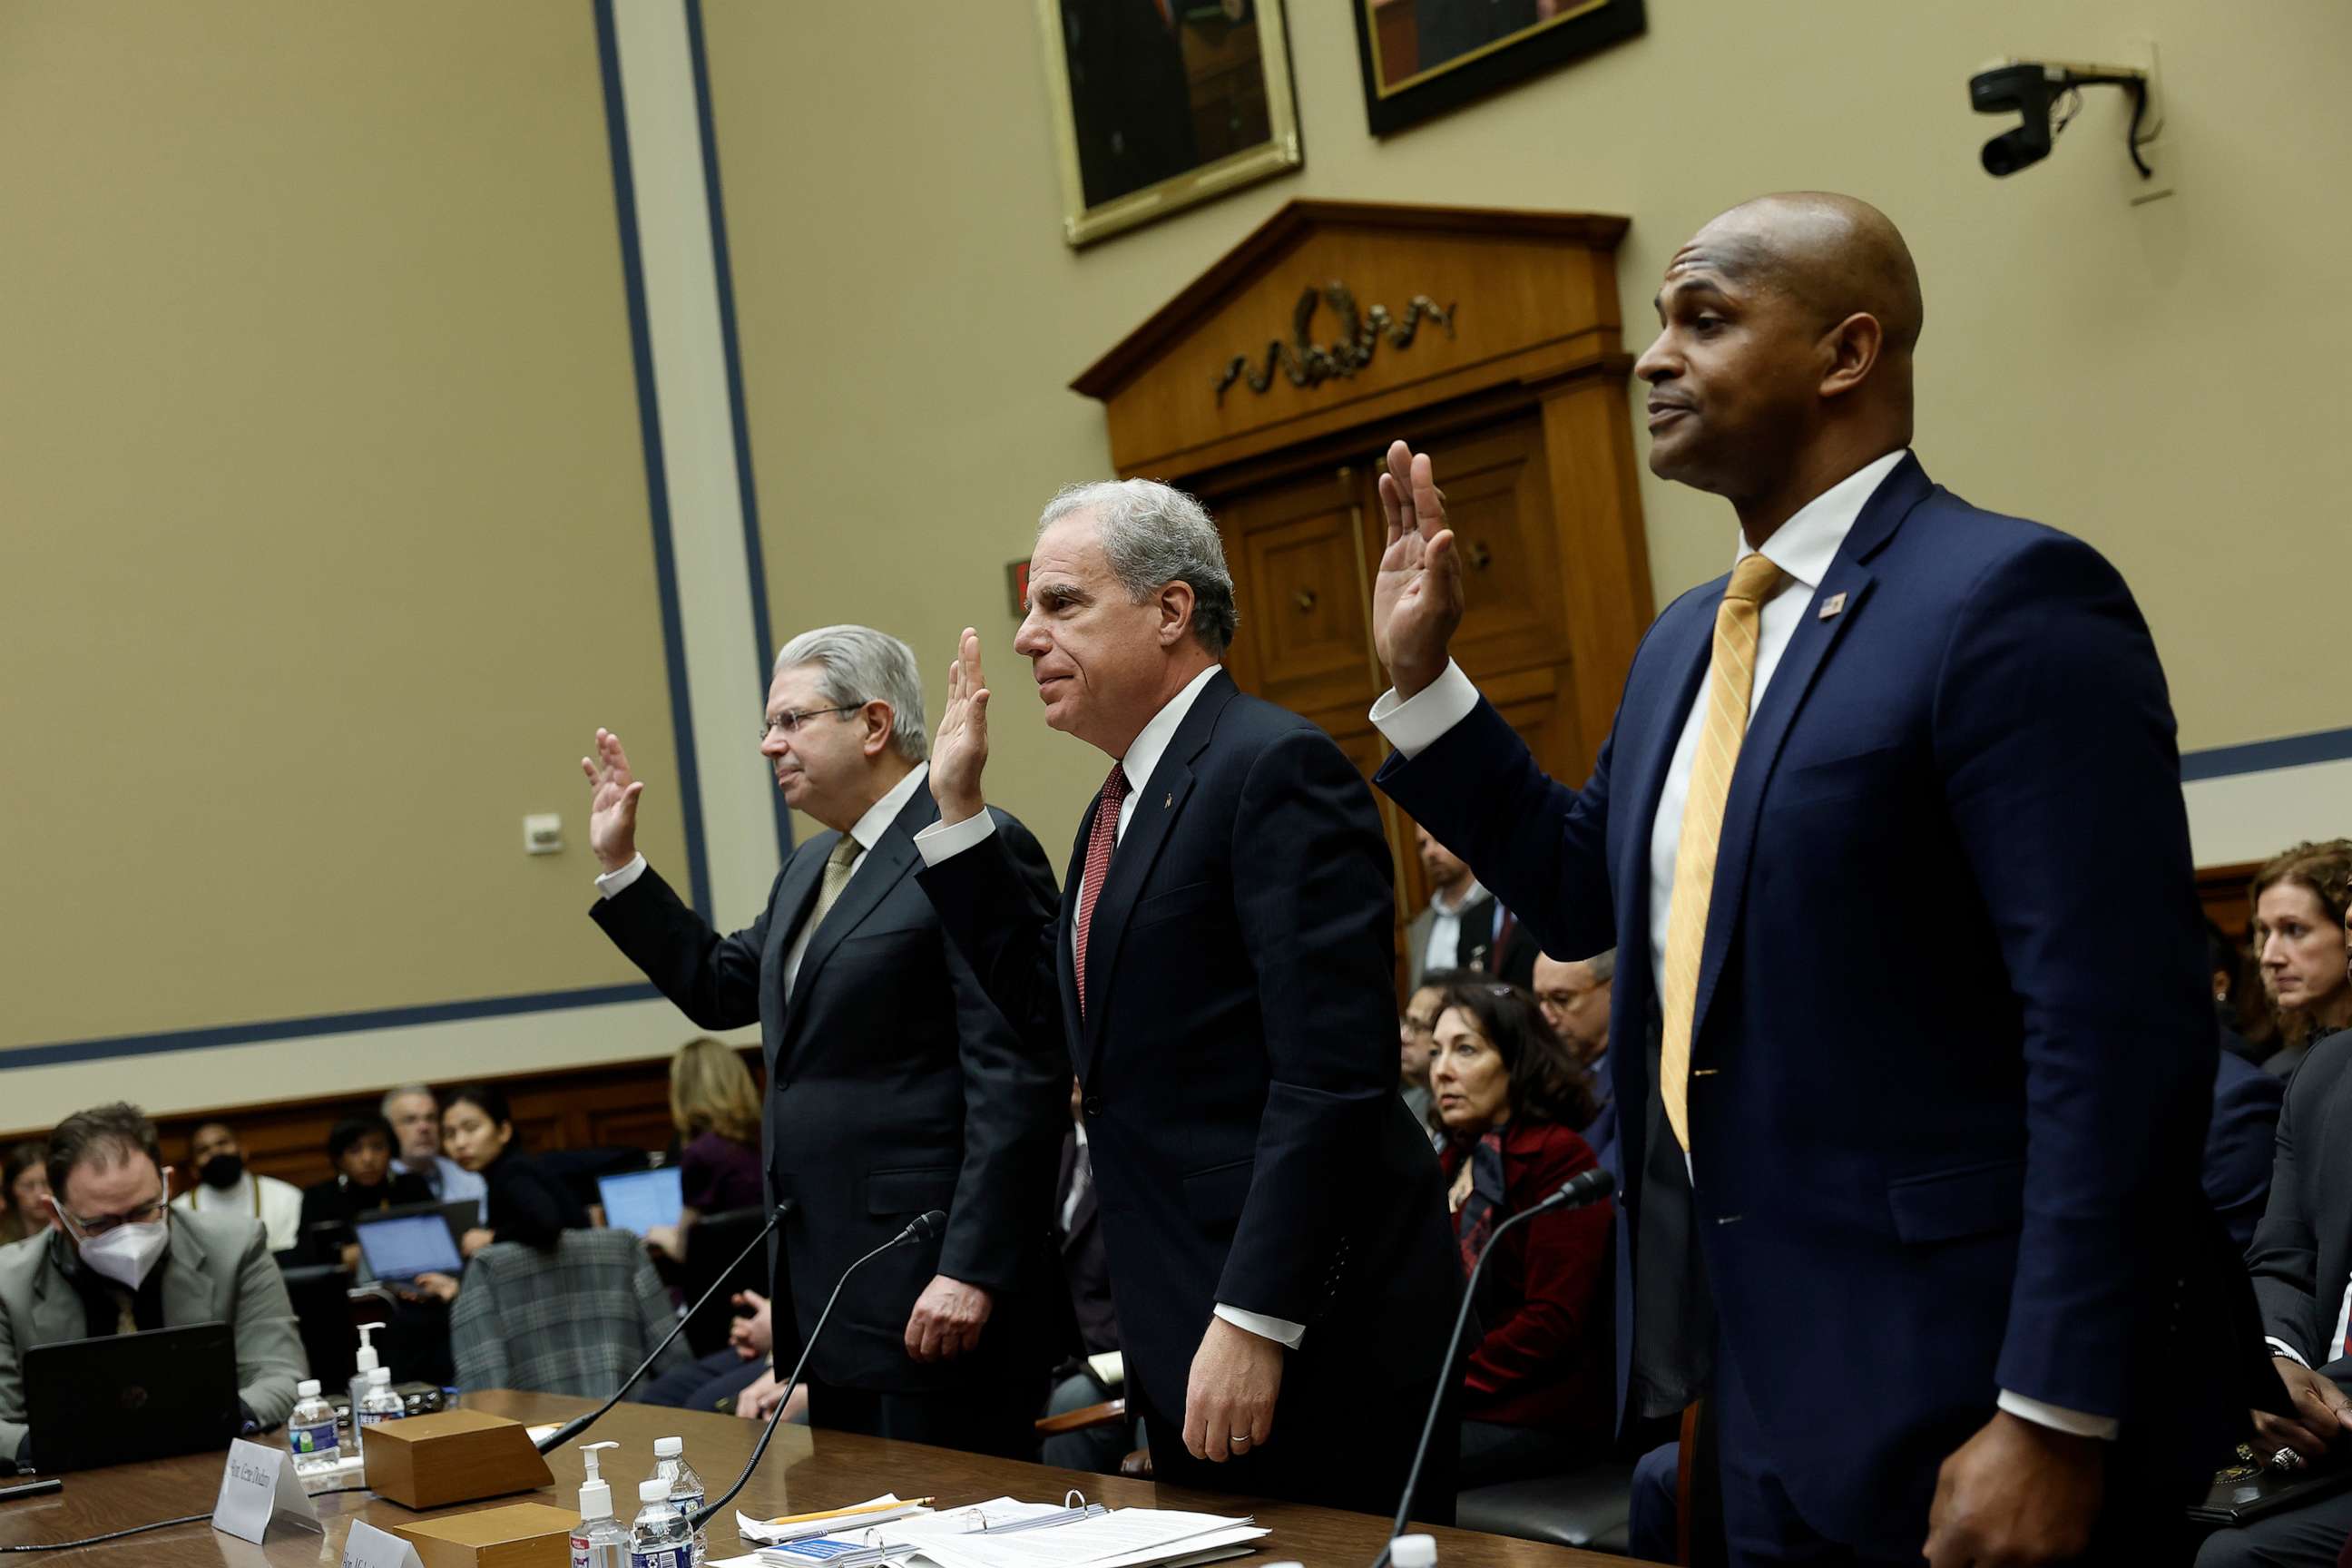 Comptroller General Gene Dodaro,Chair of the Pandemic Response Accountability Committee Michael Horowitz,and David Smith,assistant director of the Secret Service's Office of Investigations,appear at a House Oversight and Reform Committee hearing.